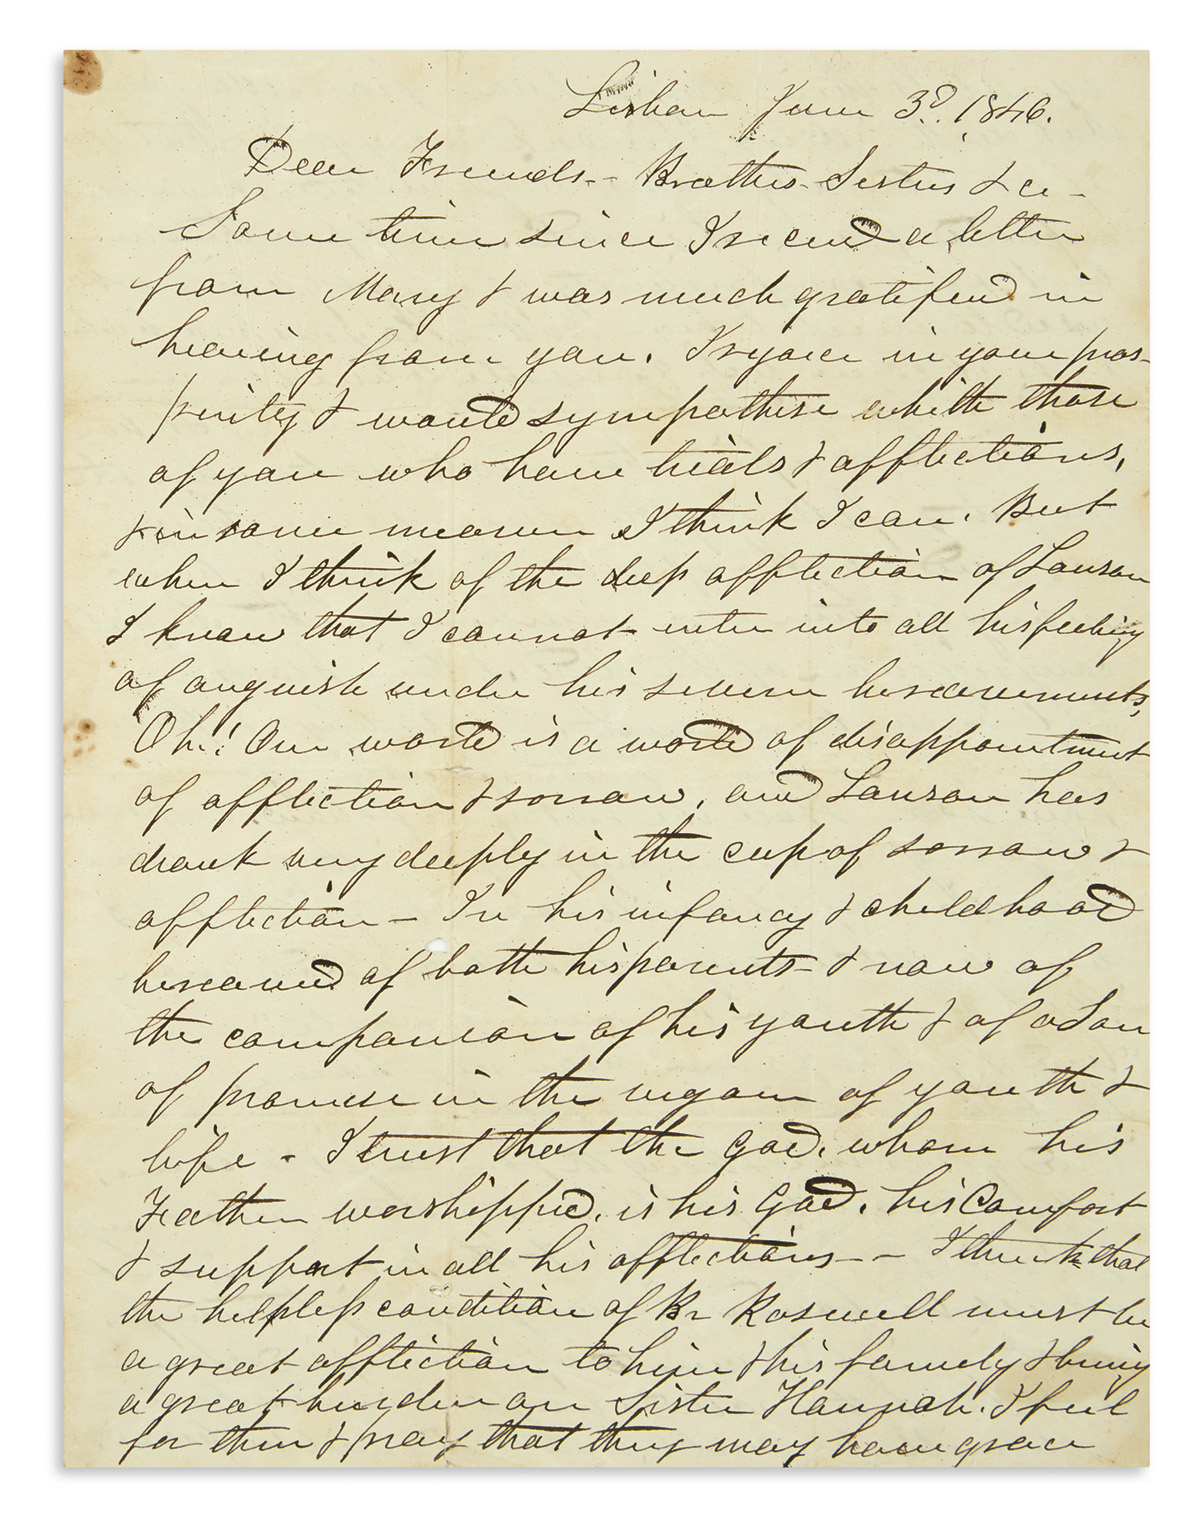 (SLAVERY AND ABOLITION.) Day, Alvah. Letter by an abolitionist clergyman and friend of Gerrit Smith.